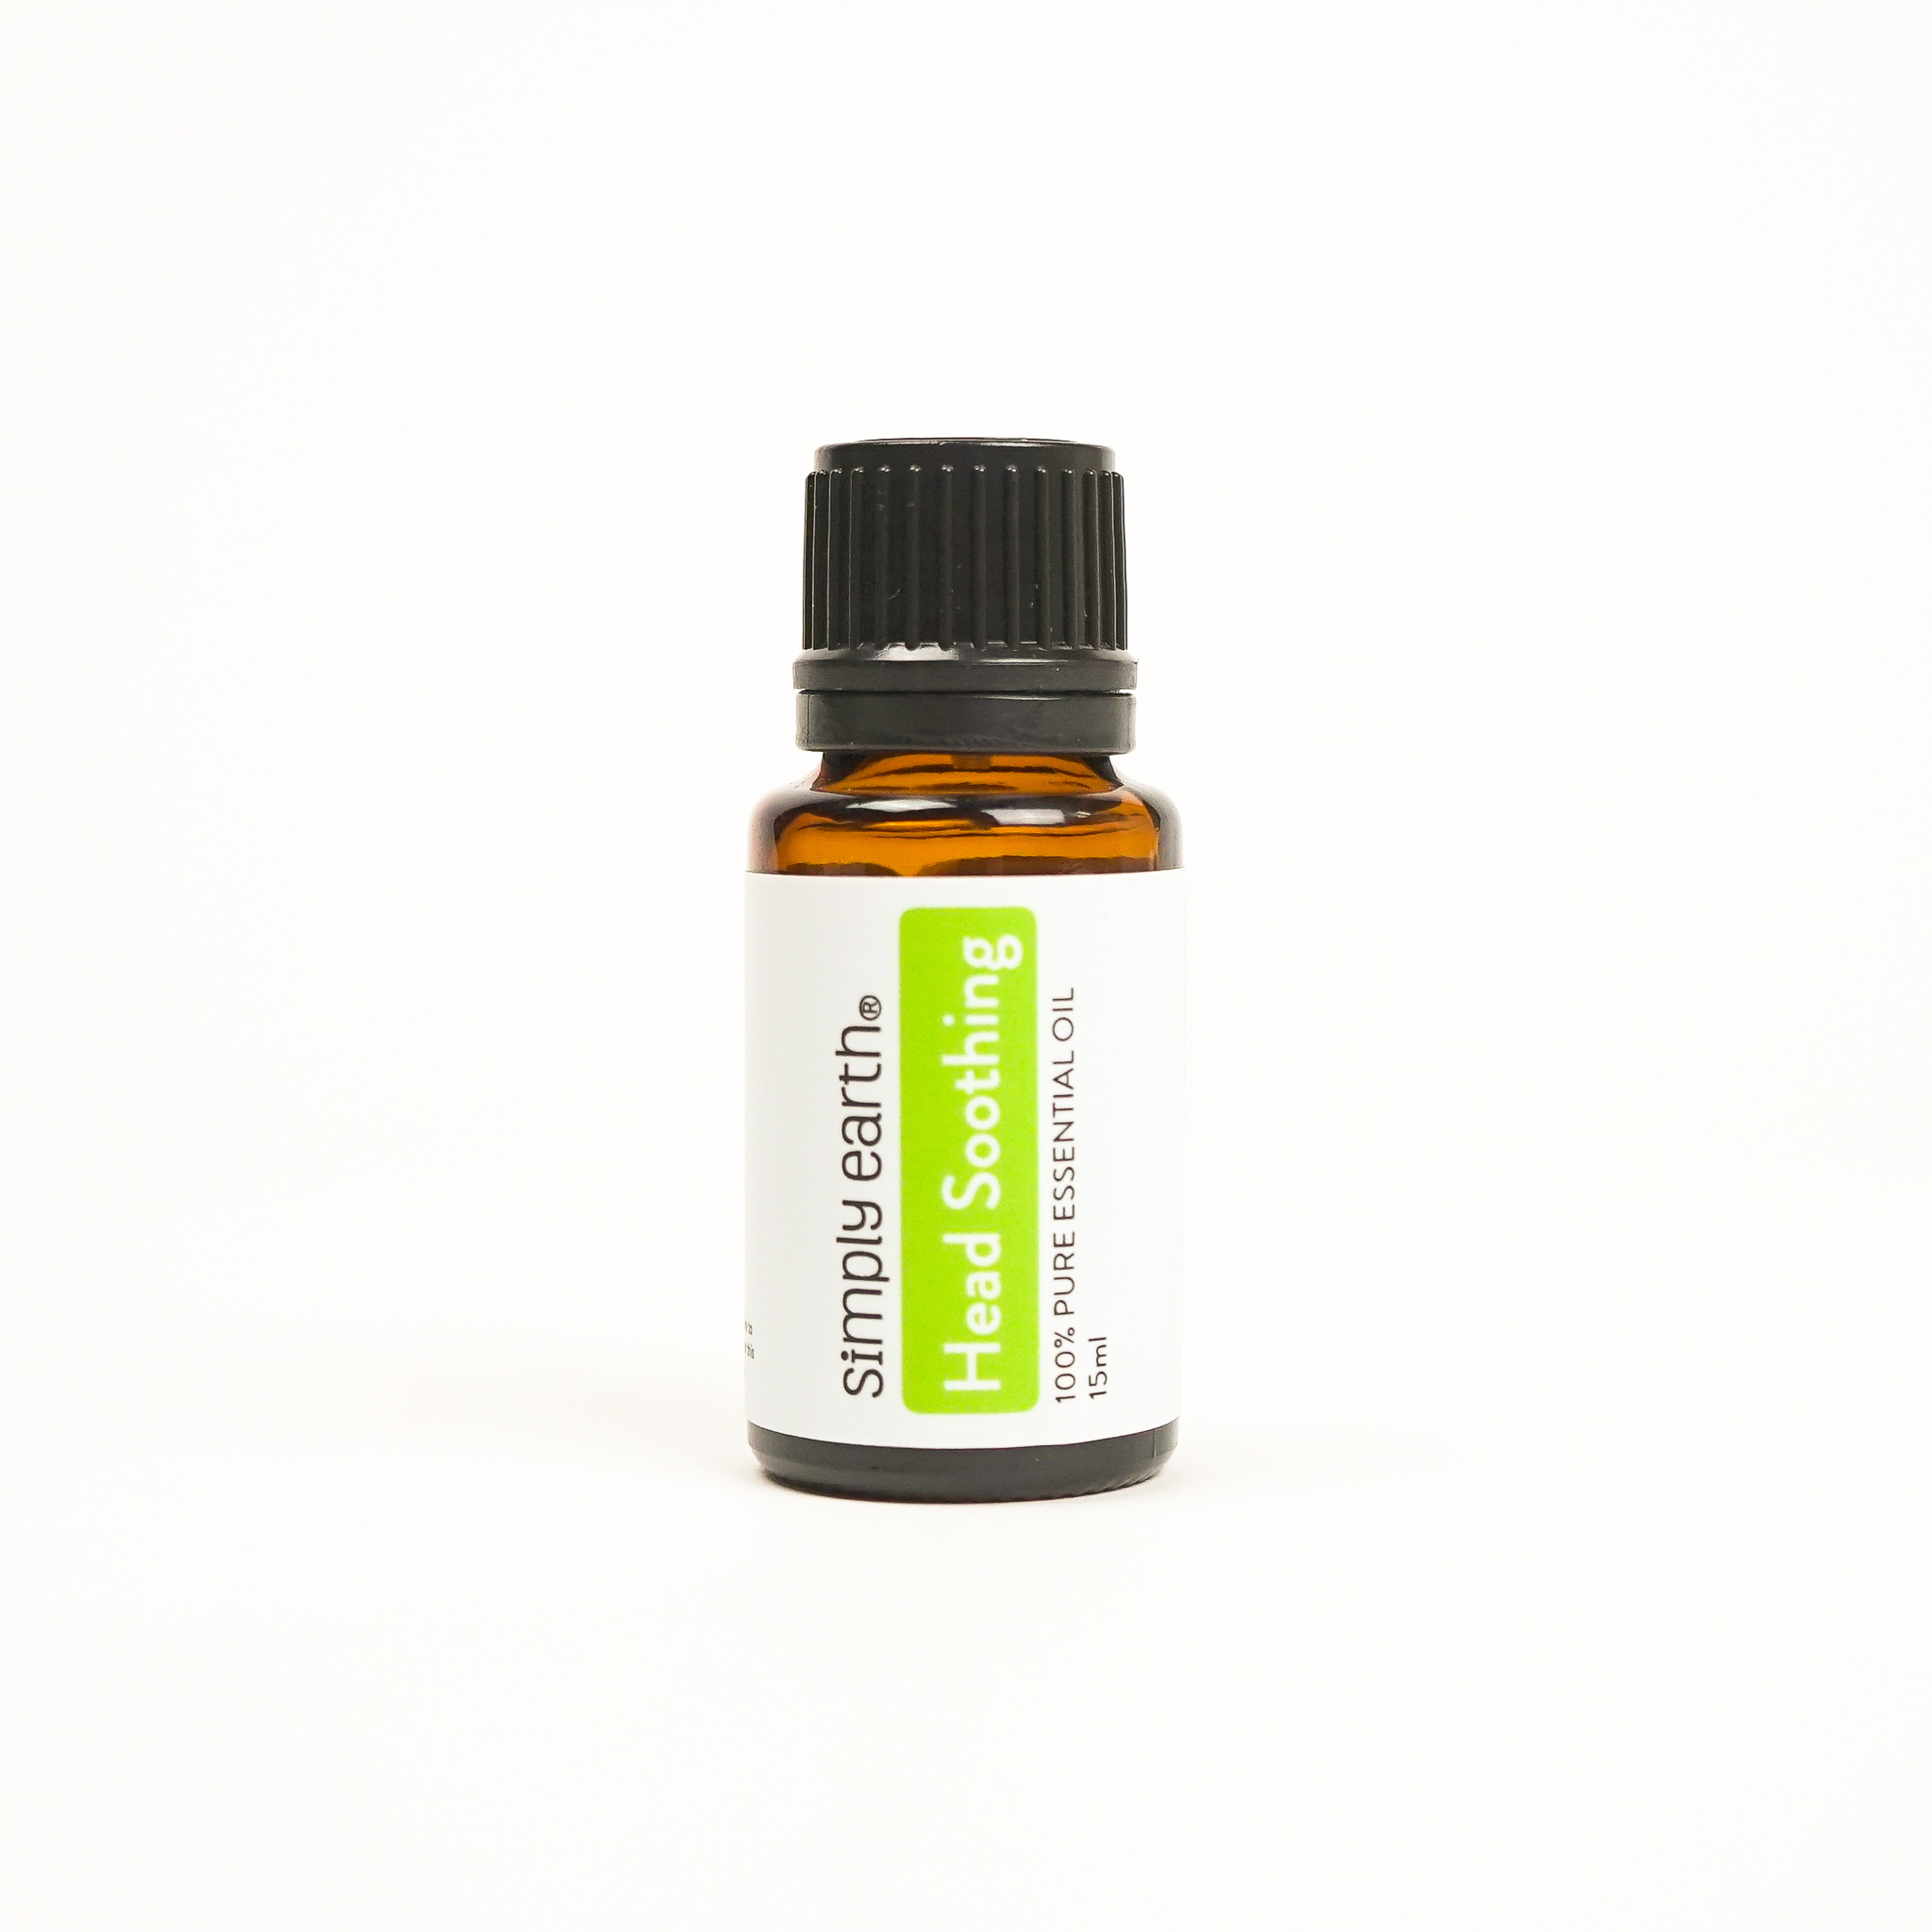 Head Soothing Essential Oil Blend Size: 15ml